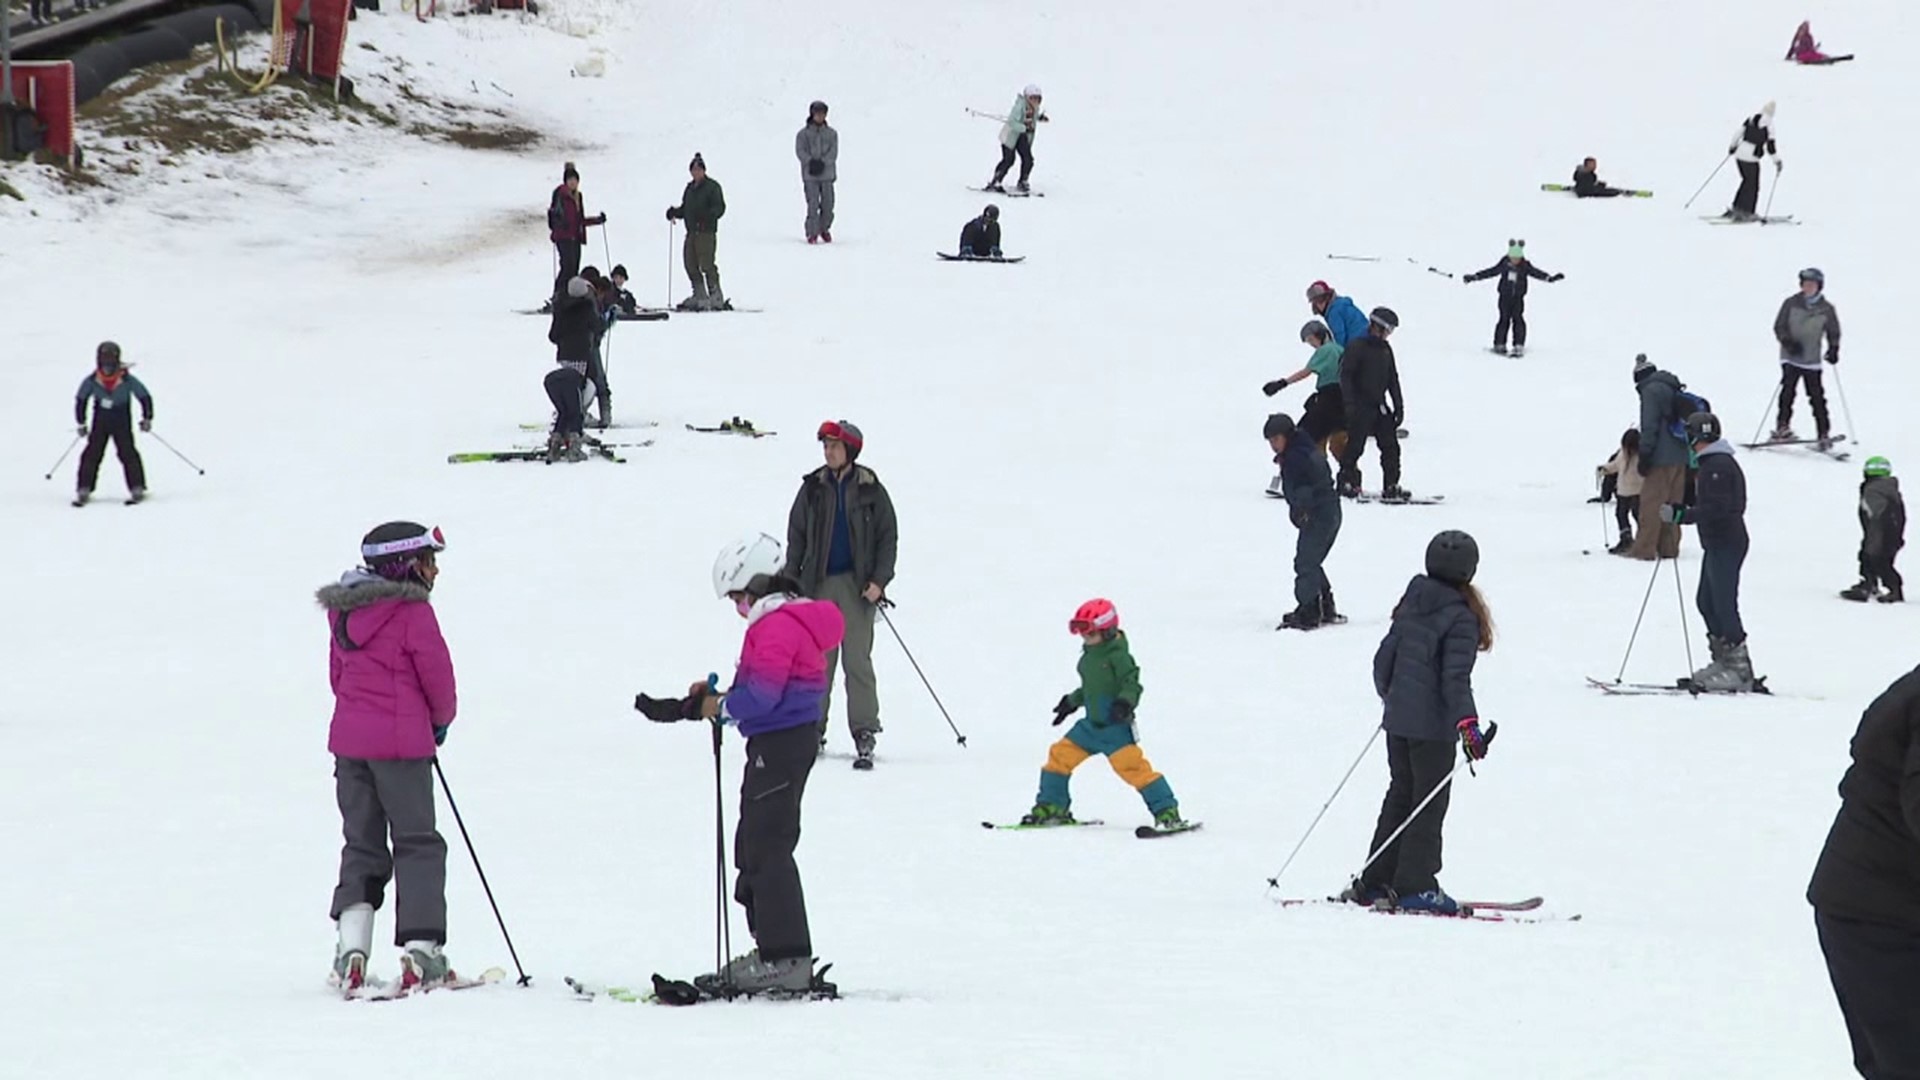 The ski resort in Monroe County was bustling with people ready to hit the snowy slopes.